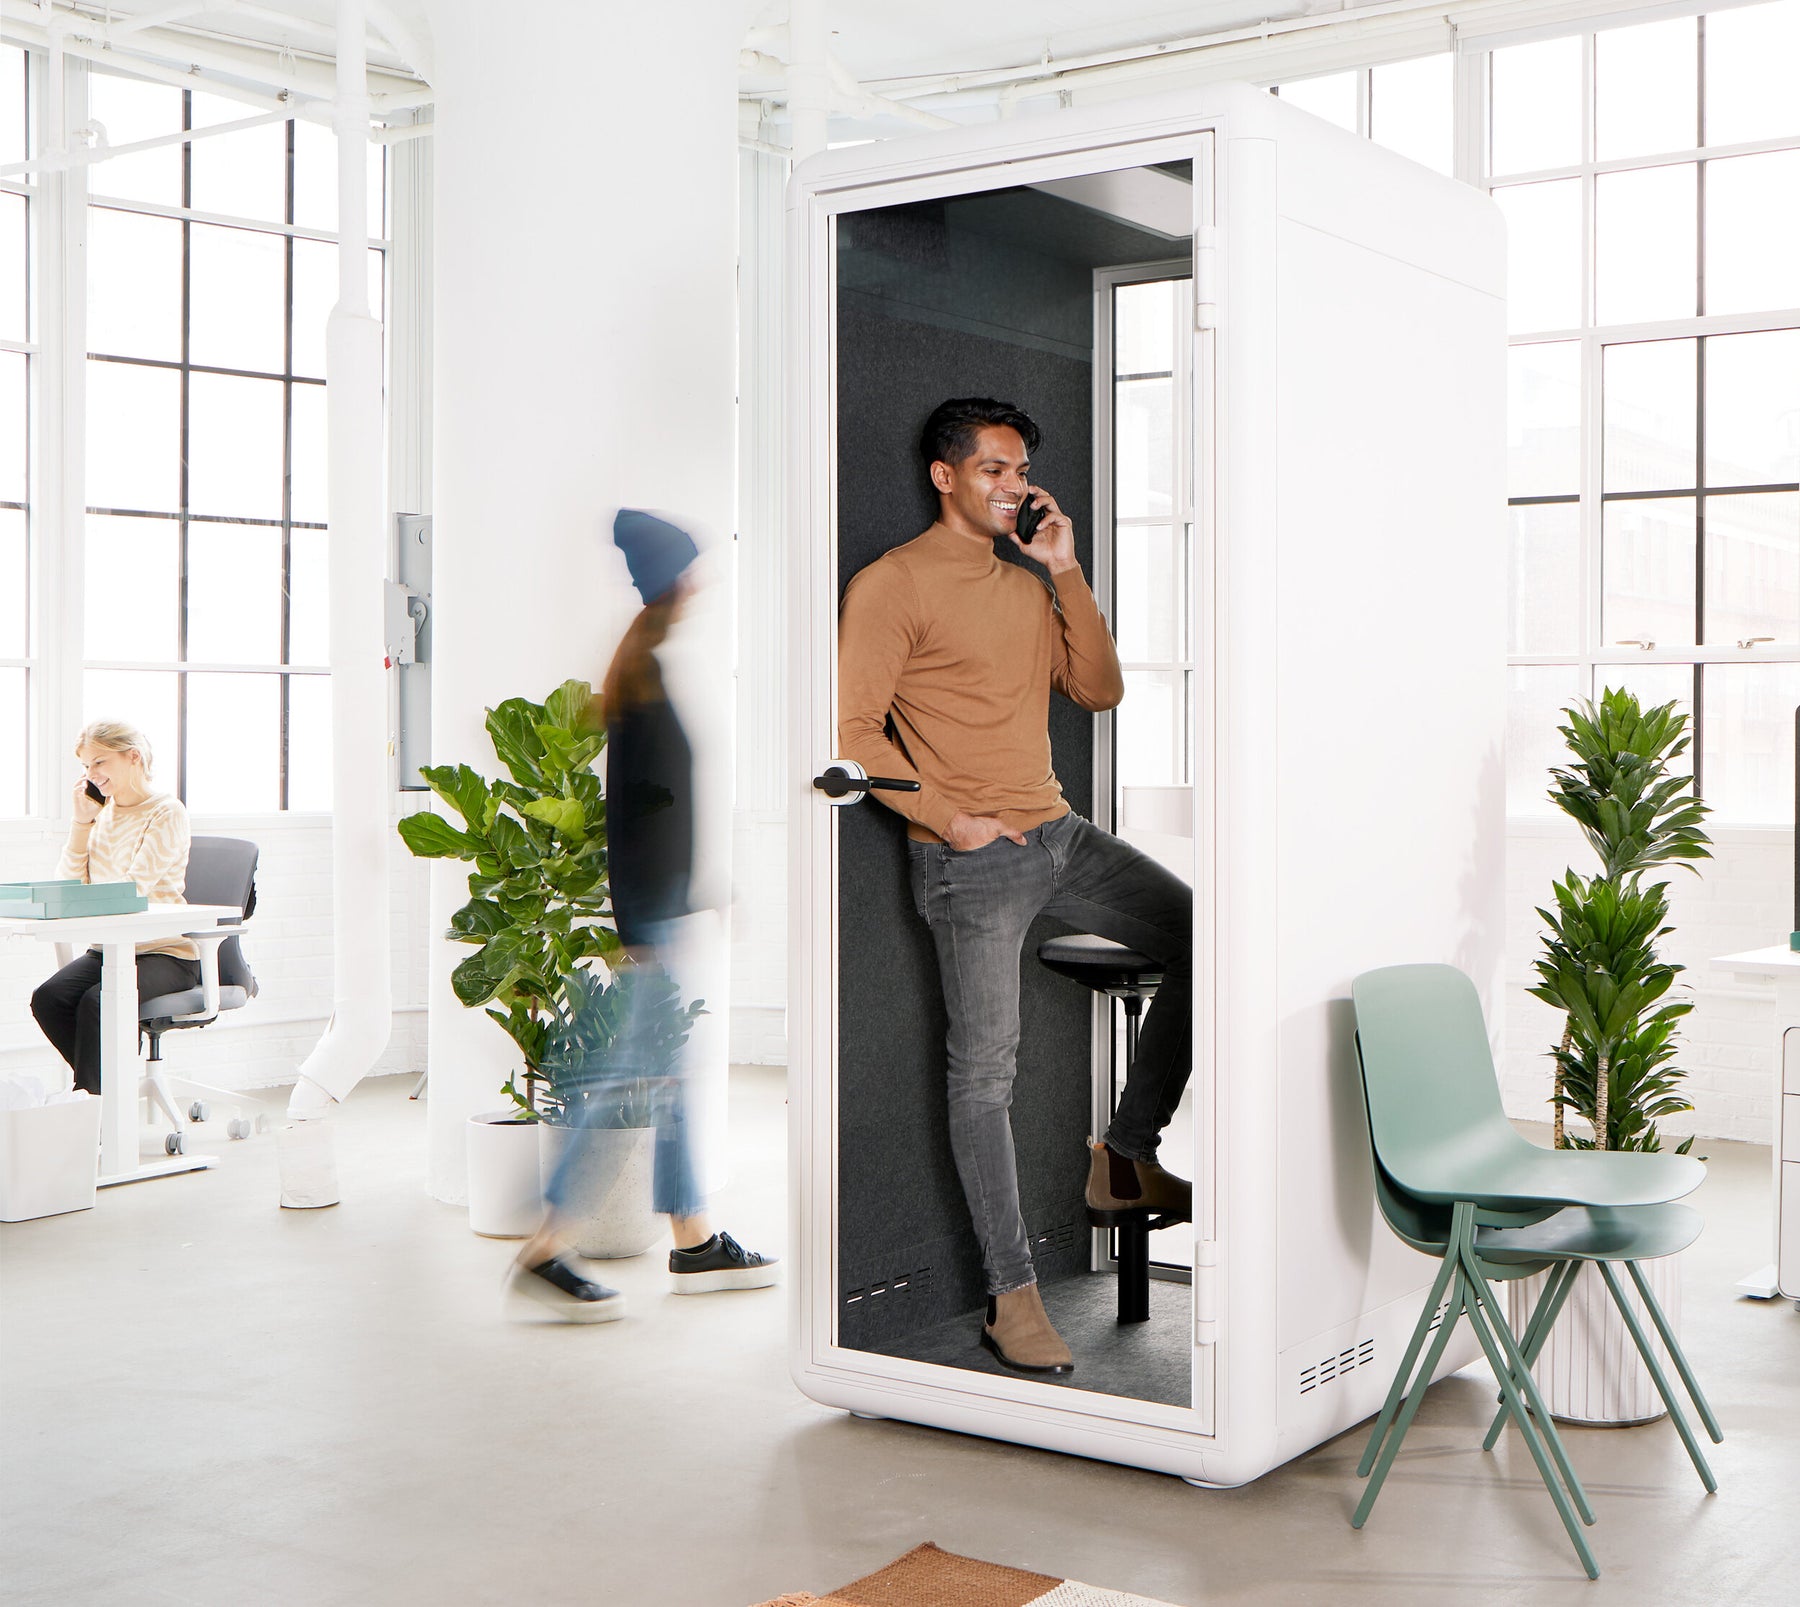 5 Ways to Use PoppinPod in the Post-COVID Workplace